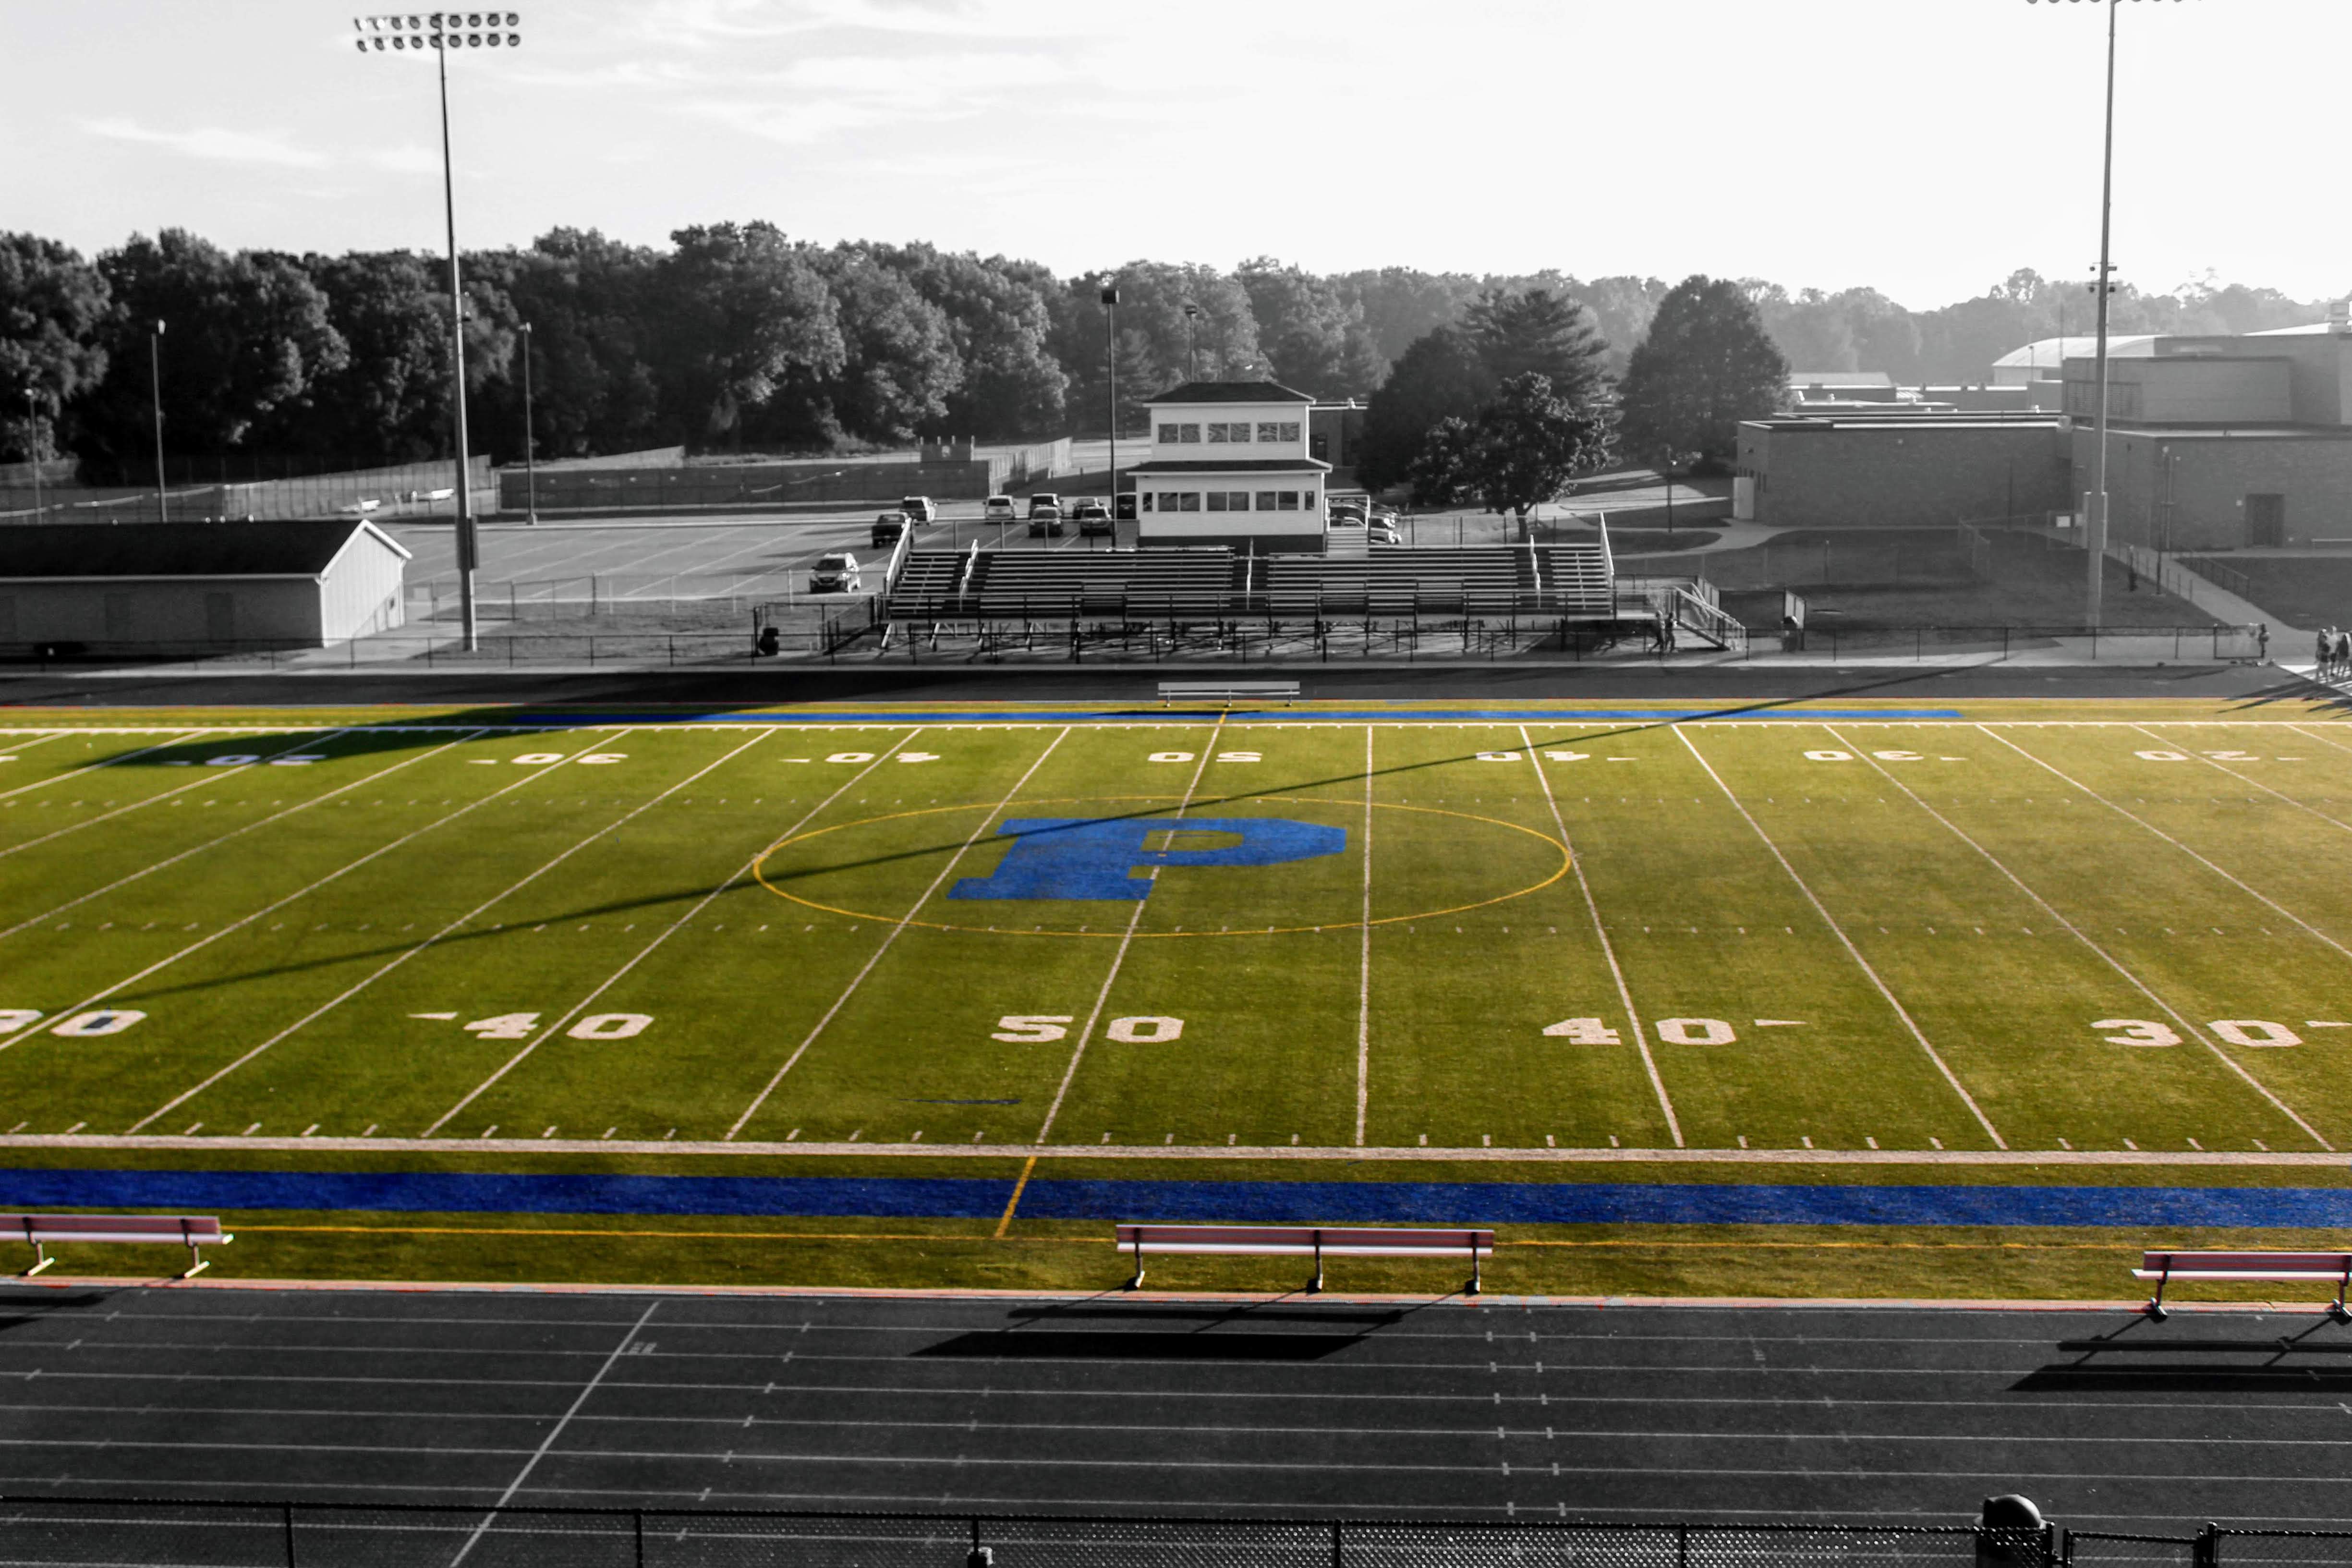 Intro to Photography picture of STREIDL FIELD